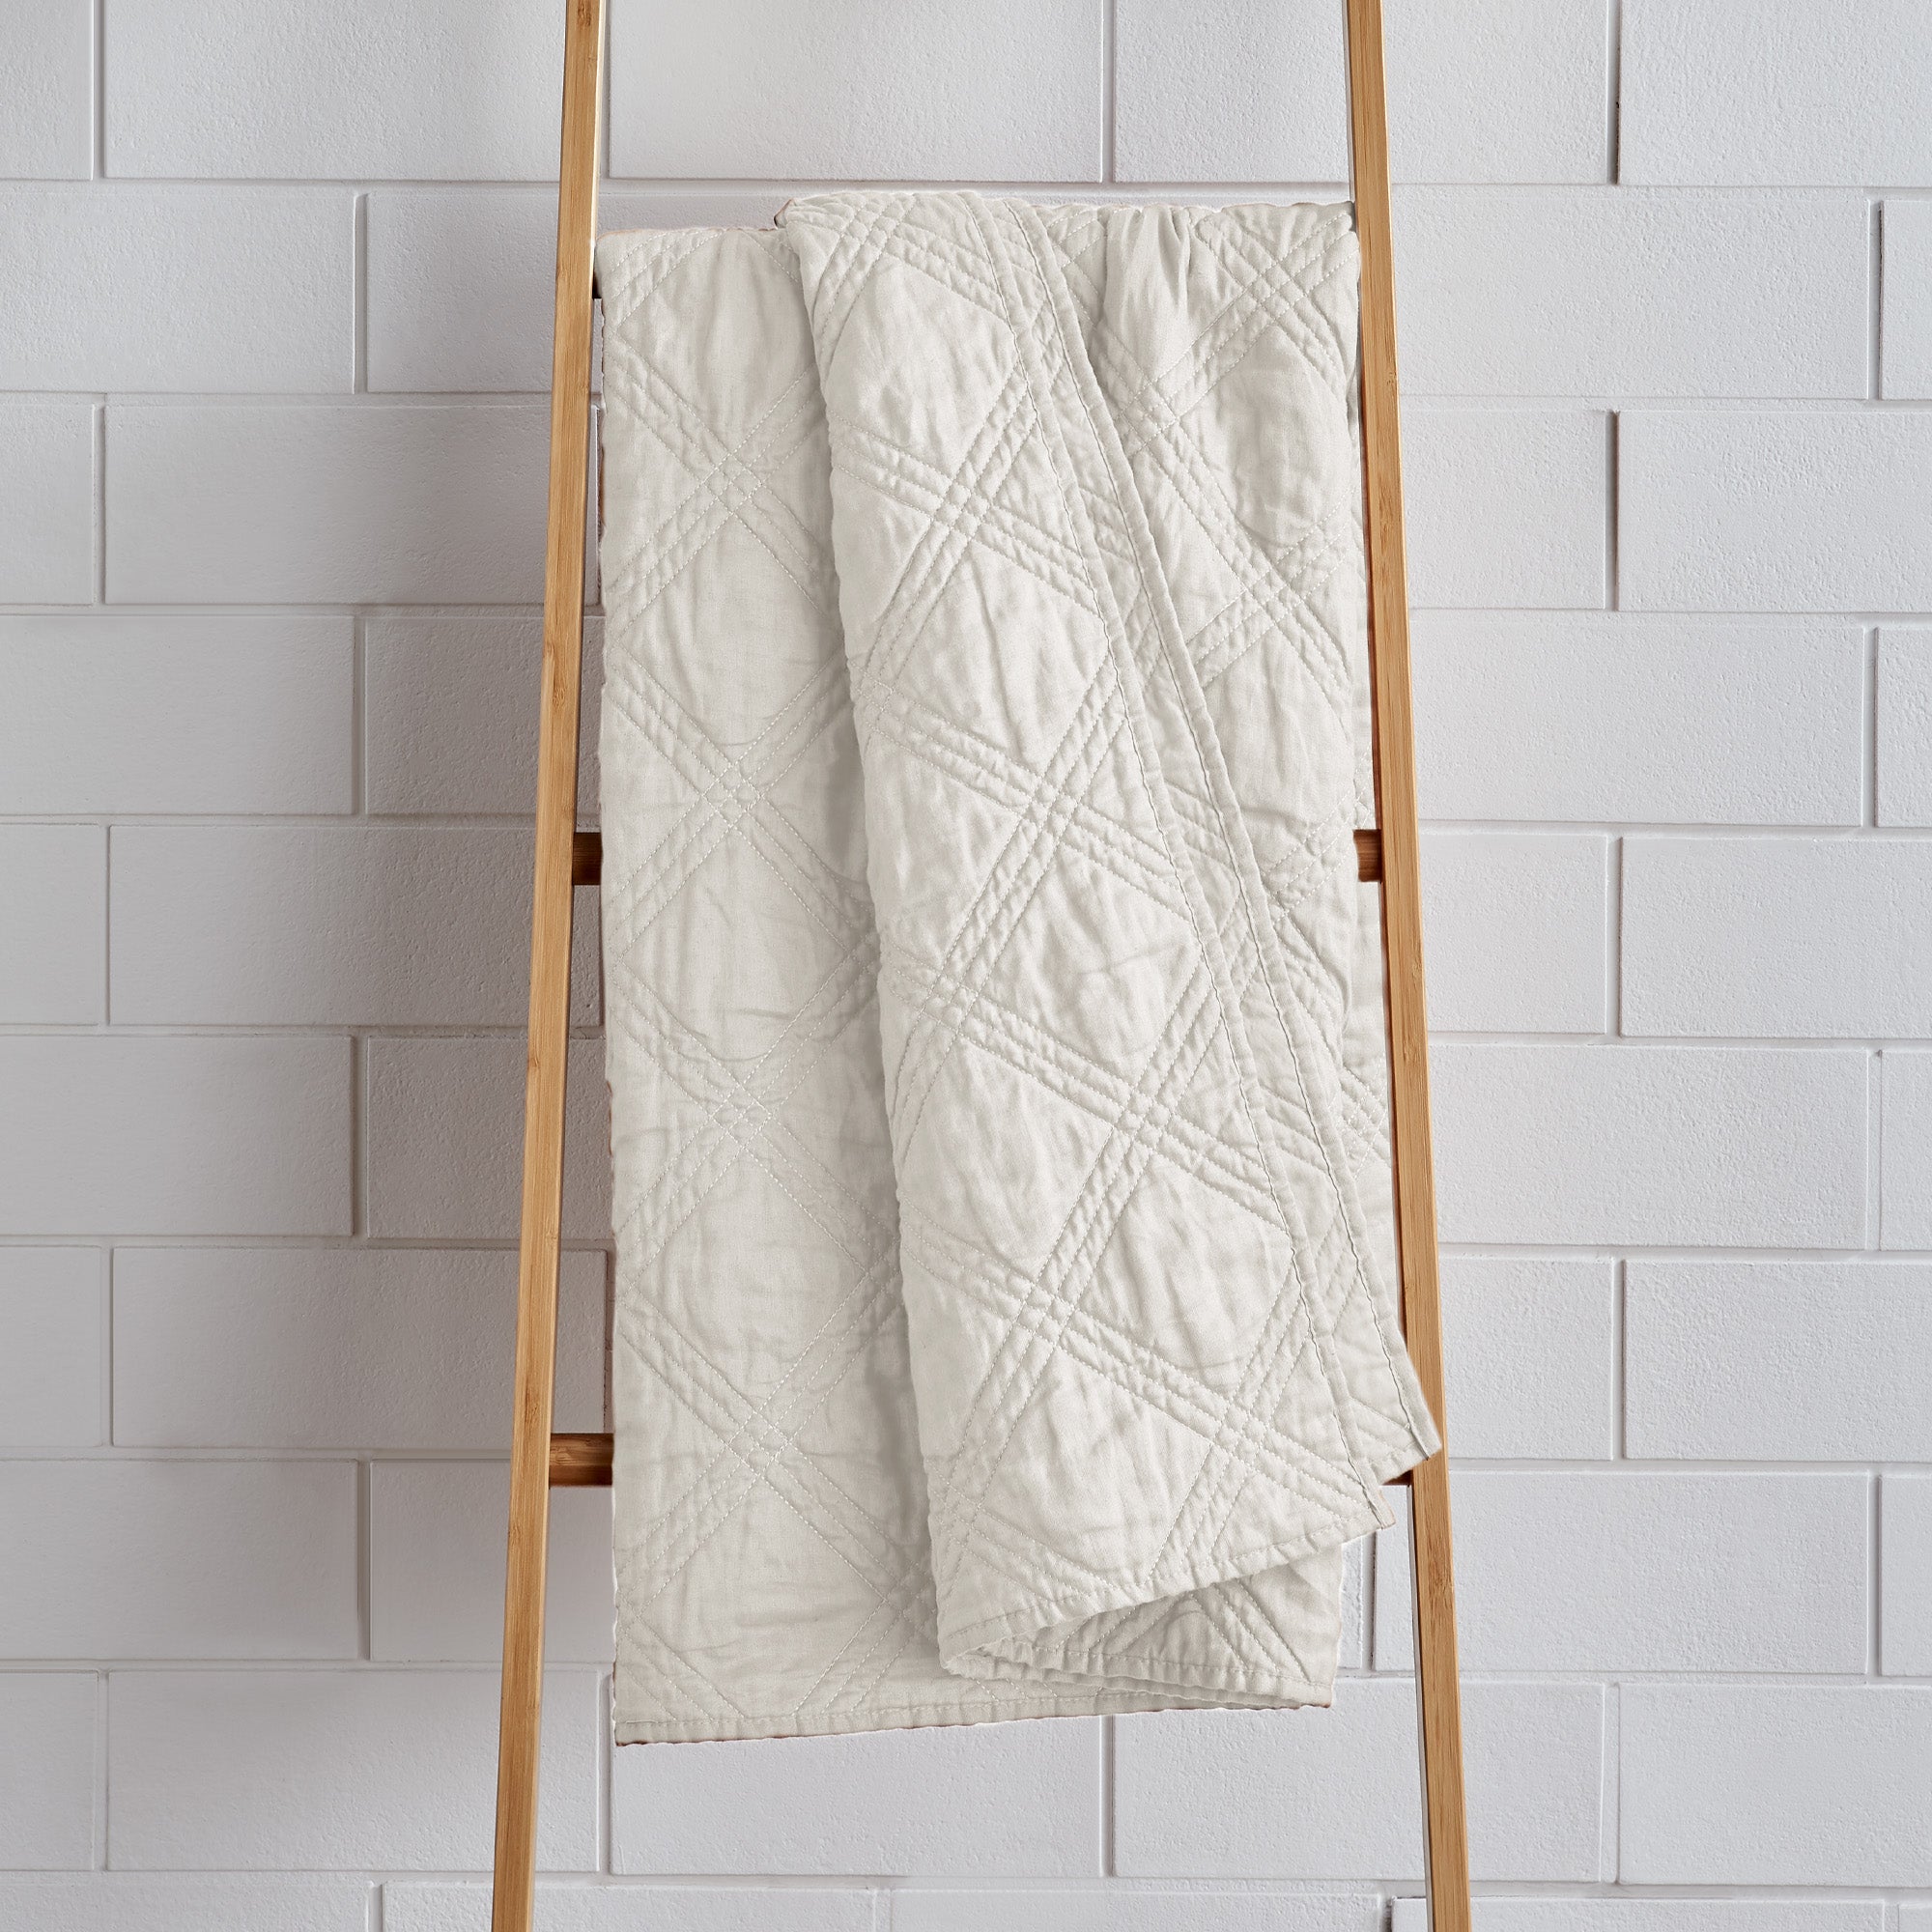 Washed Linen Quilted Throw